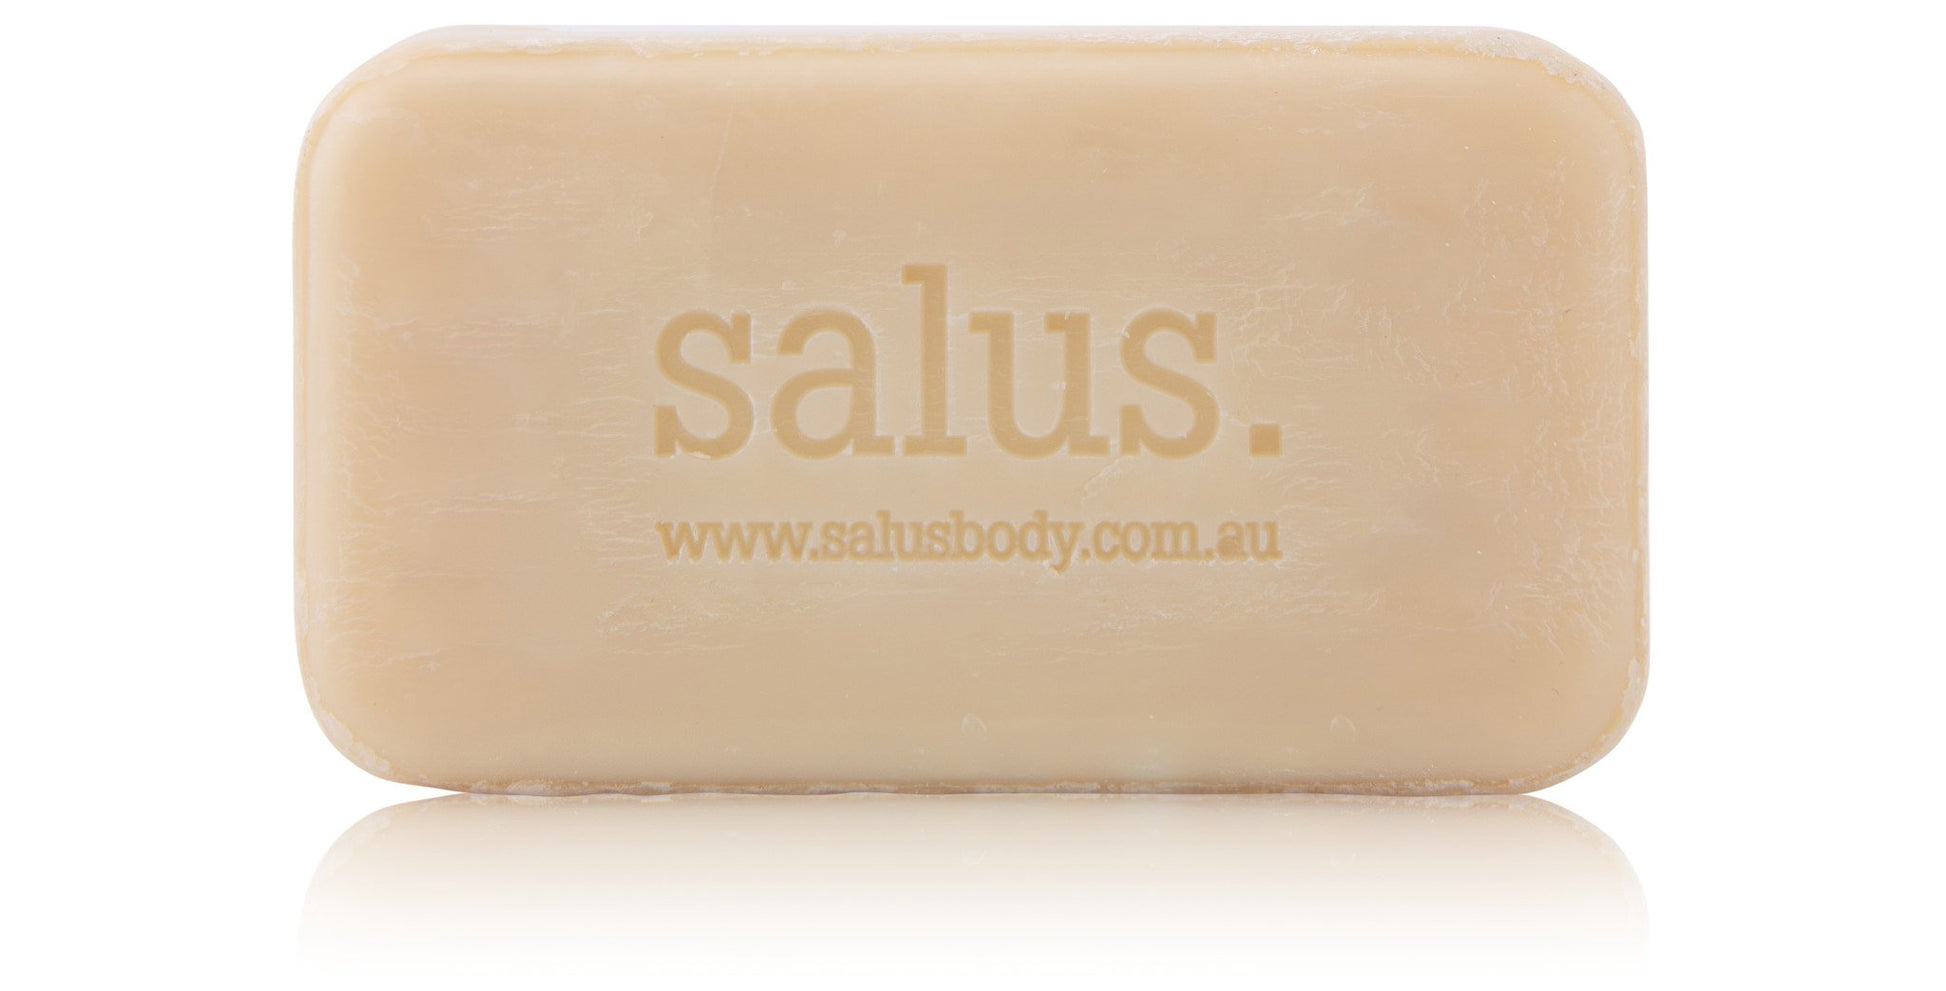 Salus White Clay SLS FREE soap Eclectopia Gifts and Specialty Homewares 